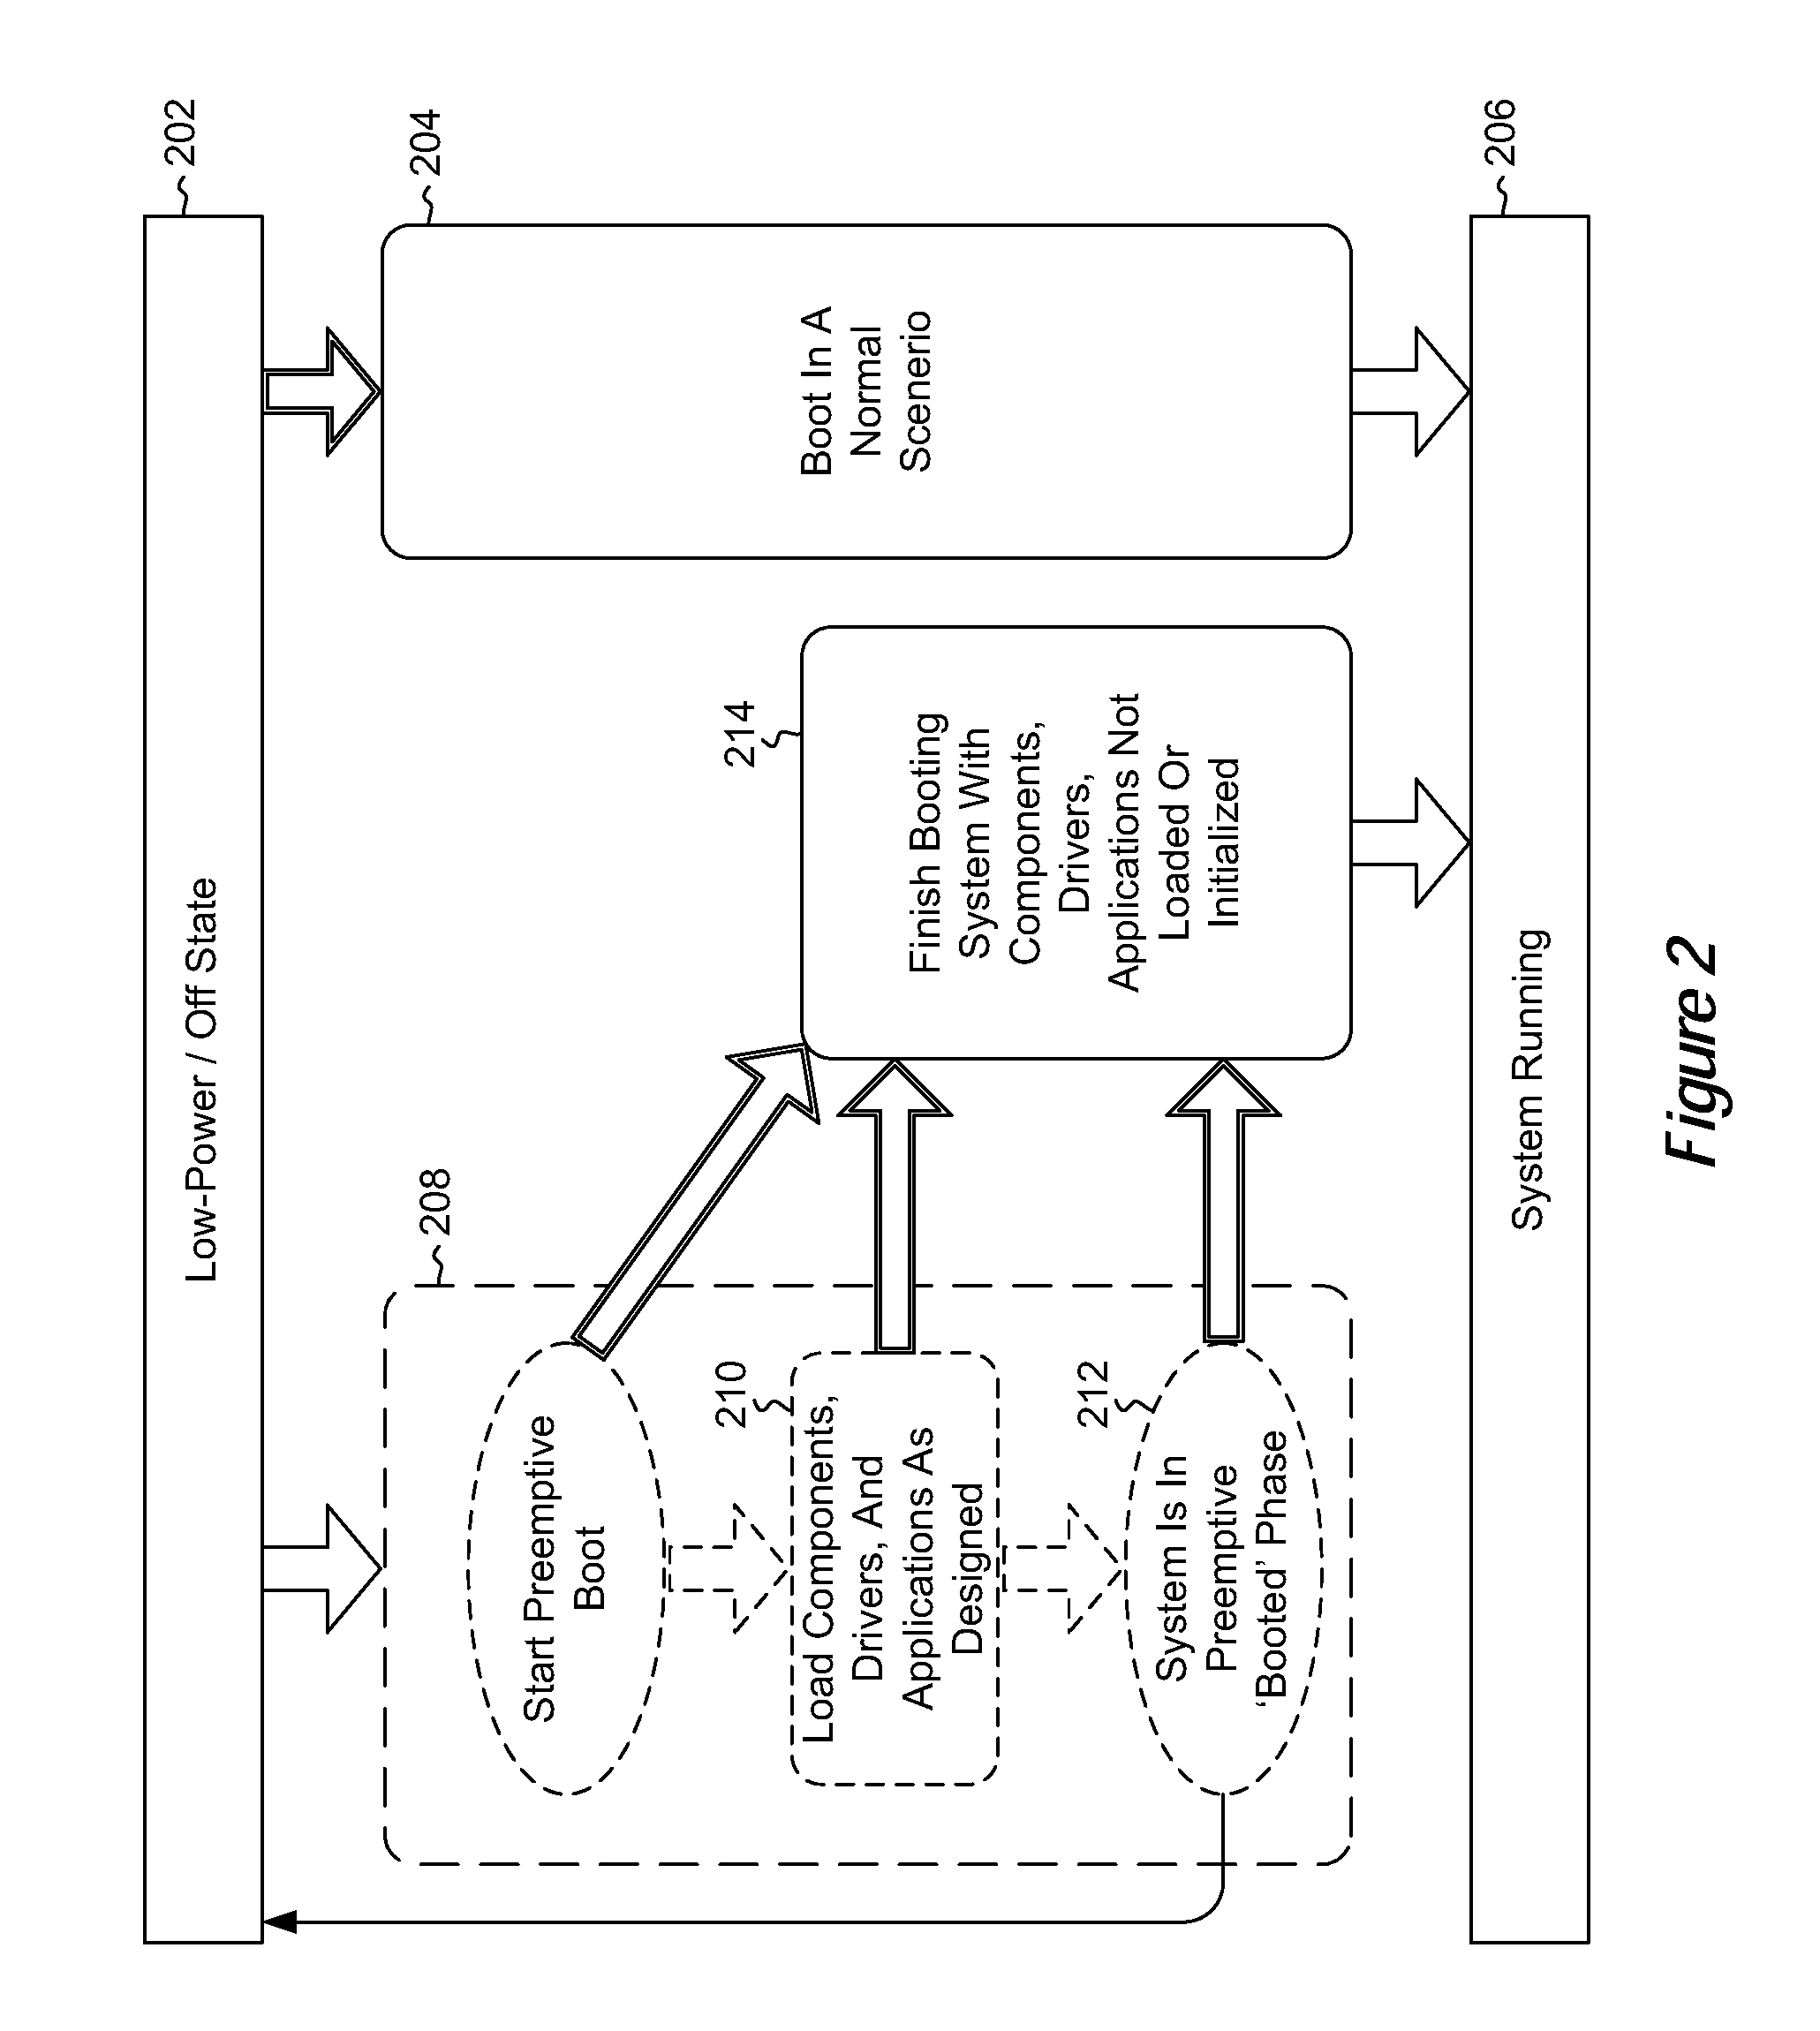 Adaptive sensing for early booting of devices